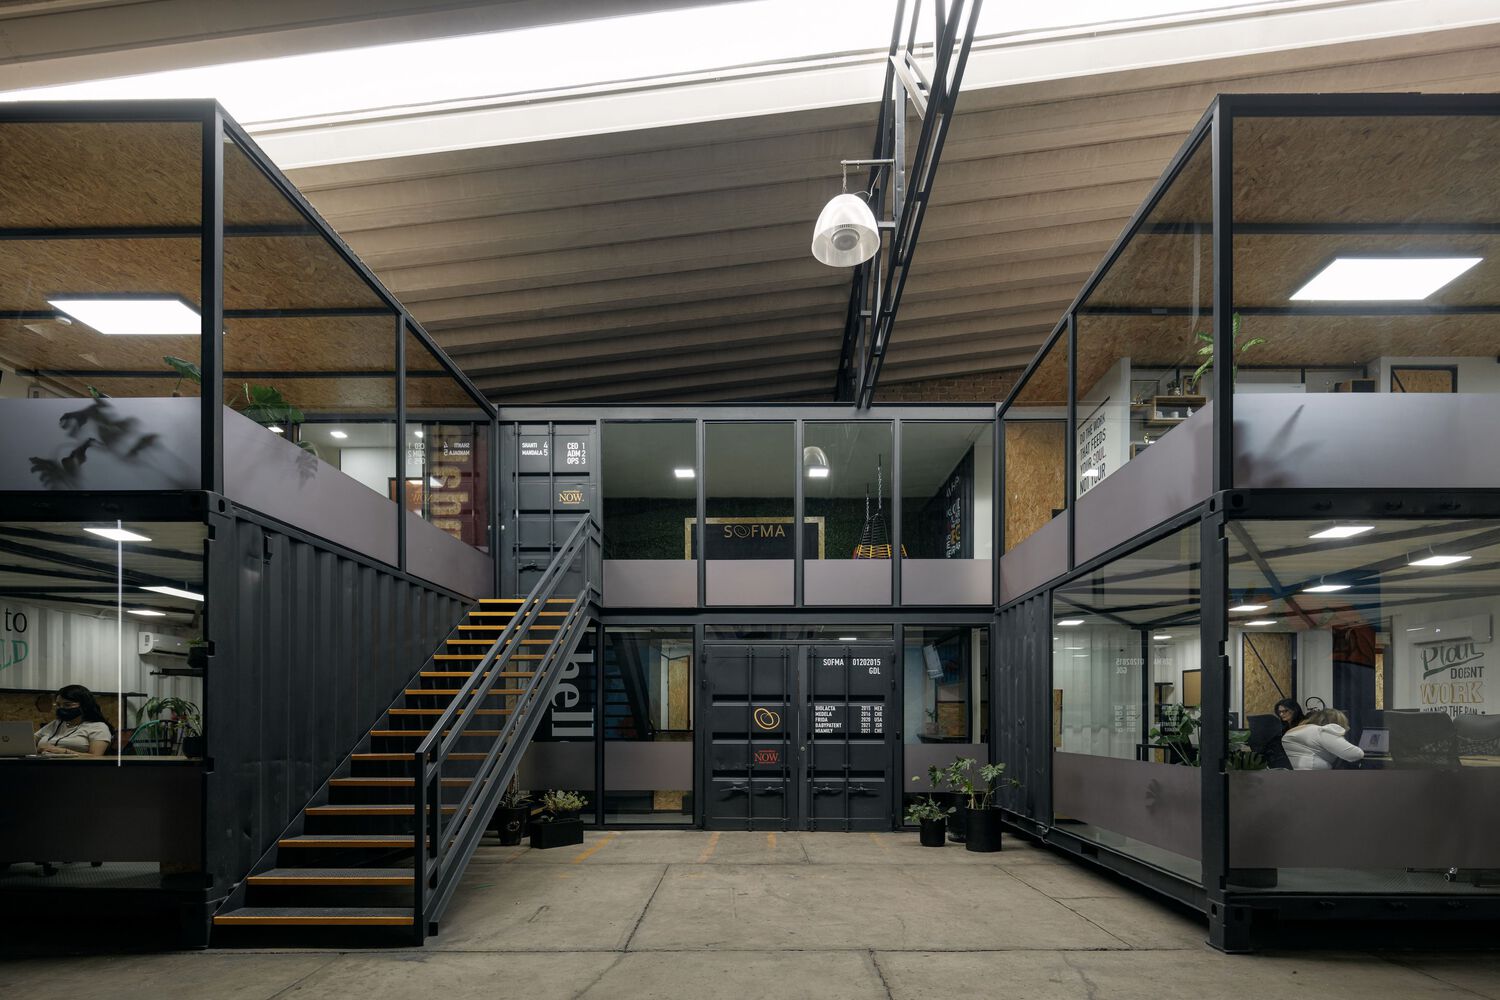 Recycling and reuse, container office space leads new trend of green building